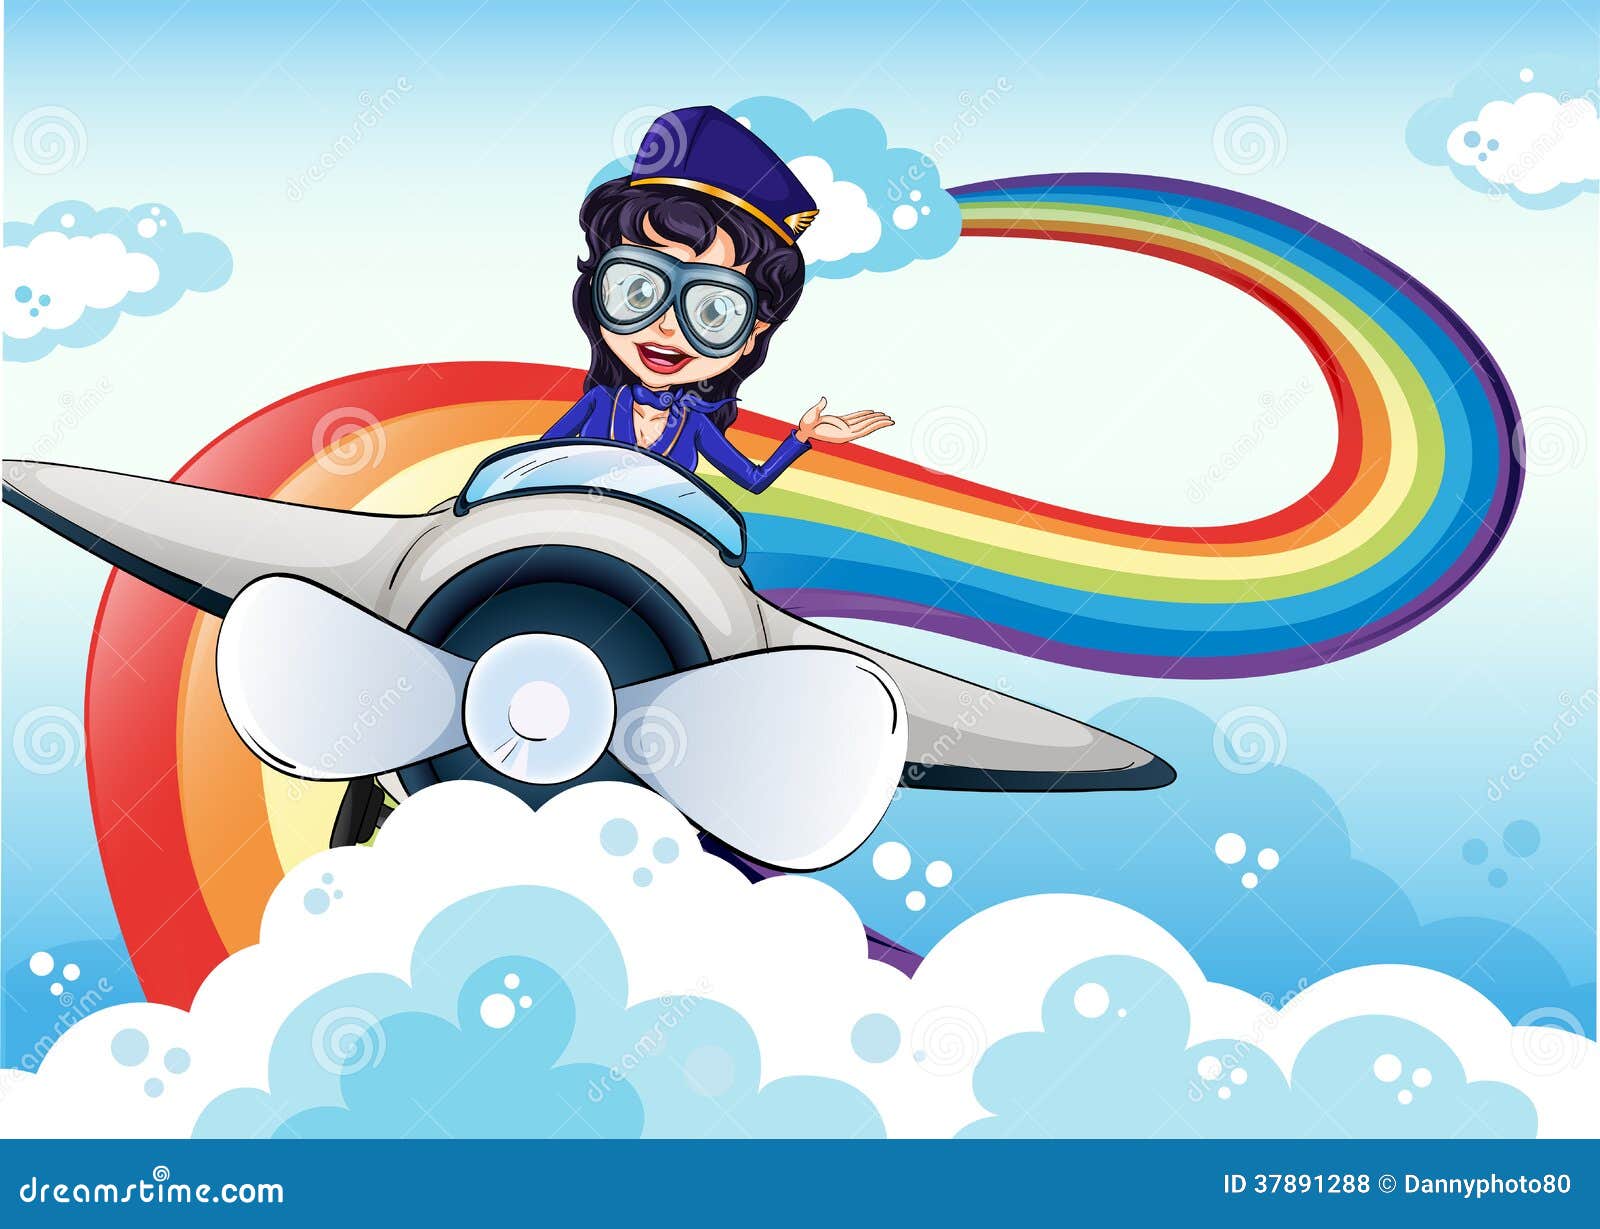 A Female Pilot Driving The Plane And A Rainbow In The Sky Stock Vector